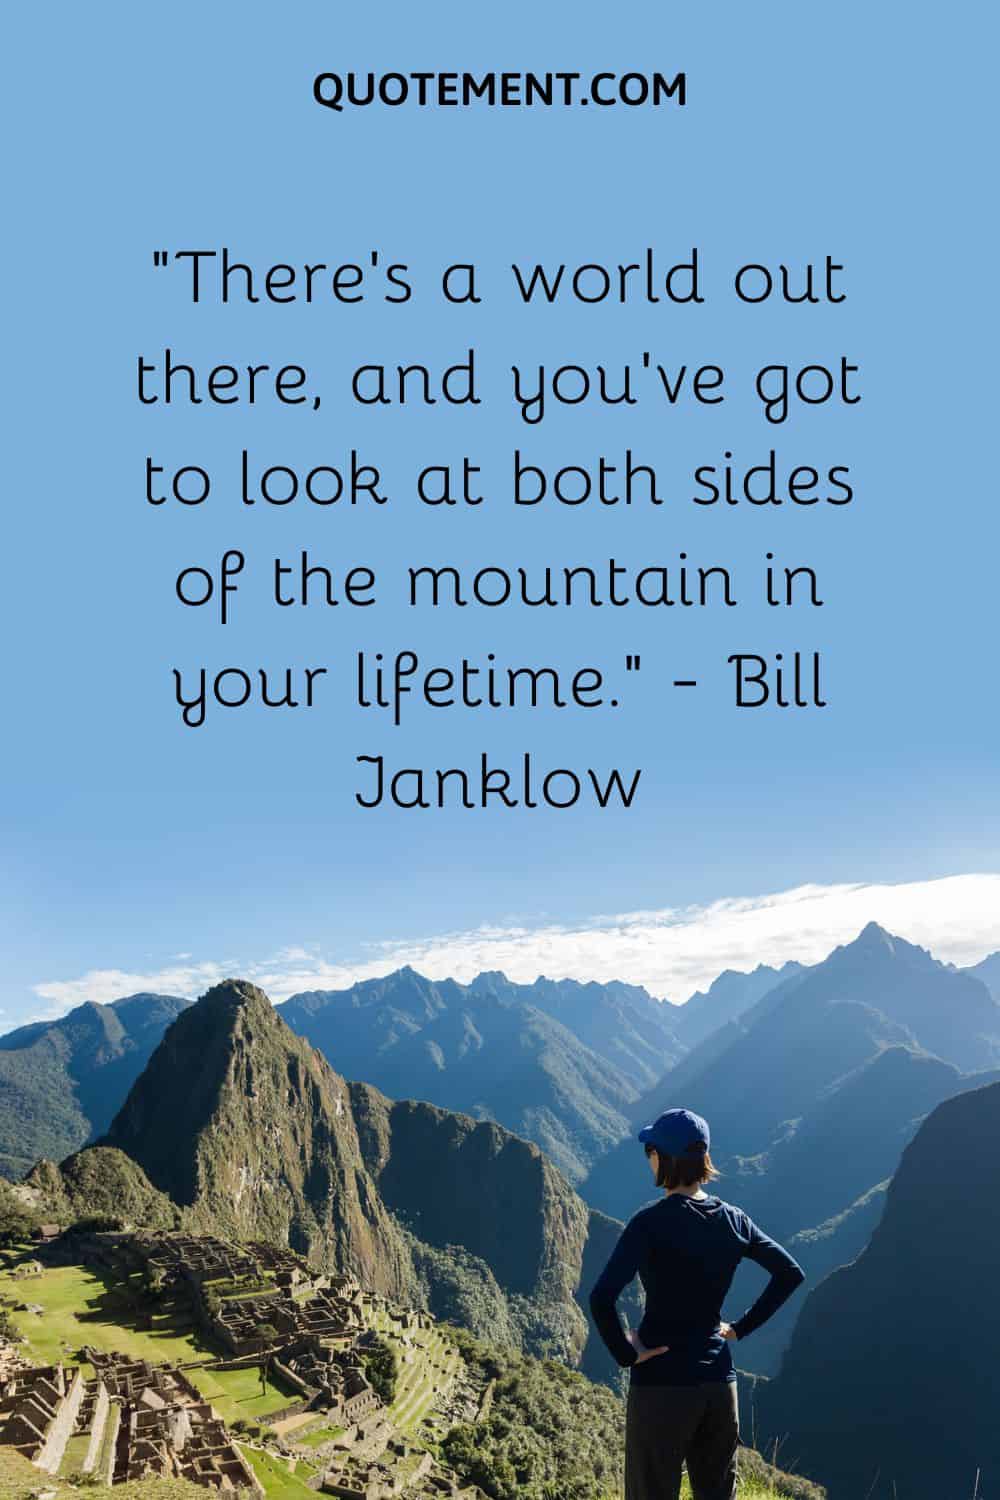 “There’s a world out there, and you’ve got to look at both sides of the mountain in your lifetime.” — Bill Janklow